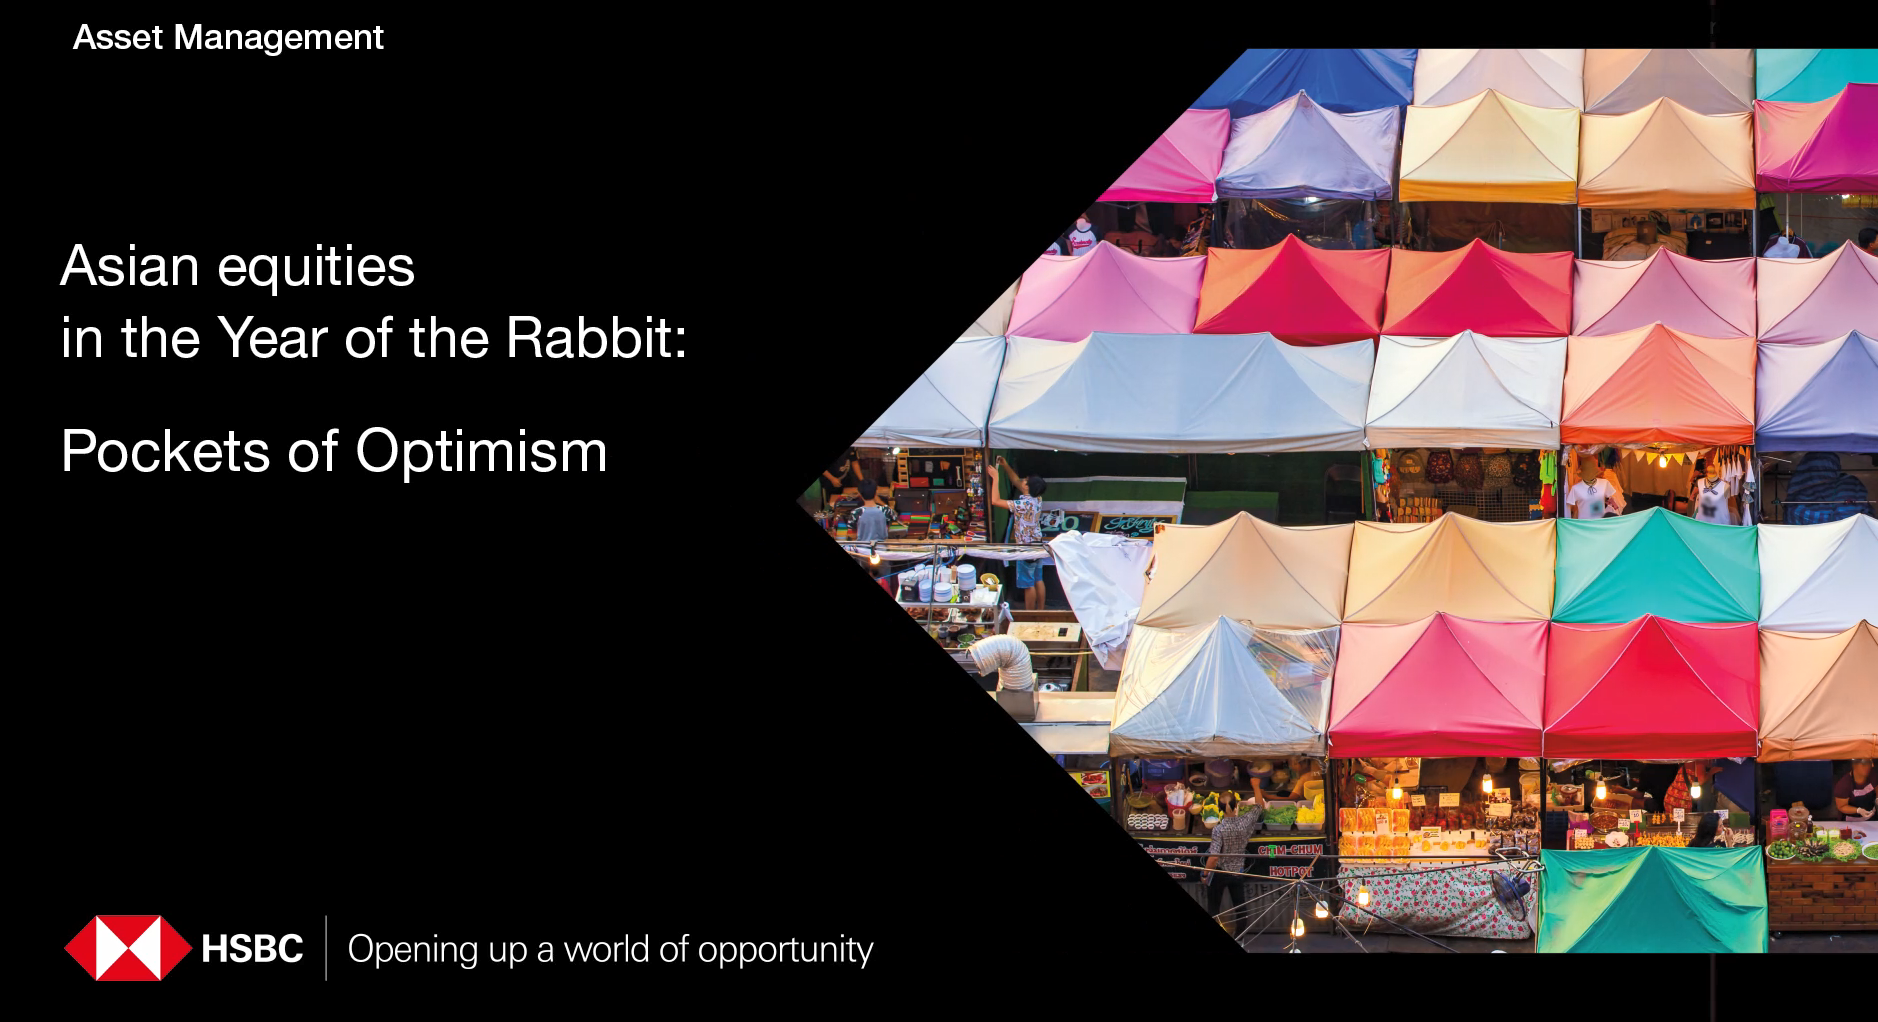 sian equities in the Year of the Rabbit: Pockets of optimism